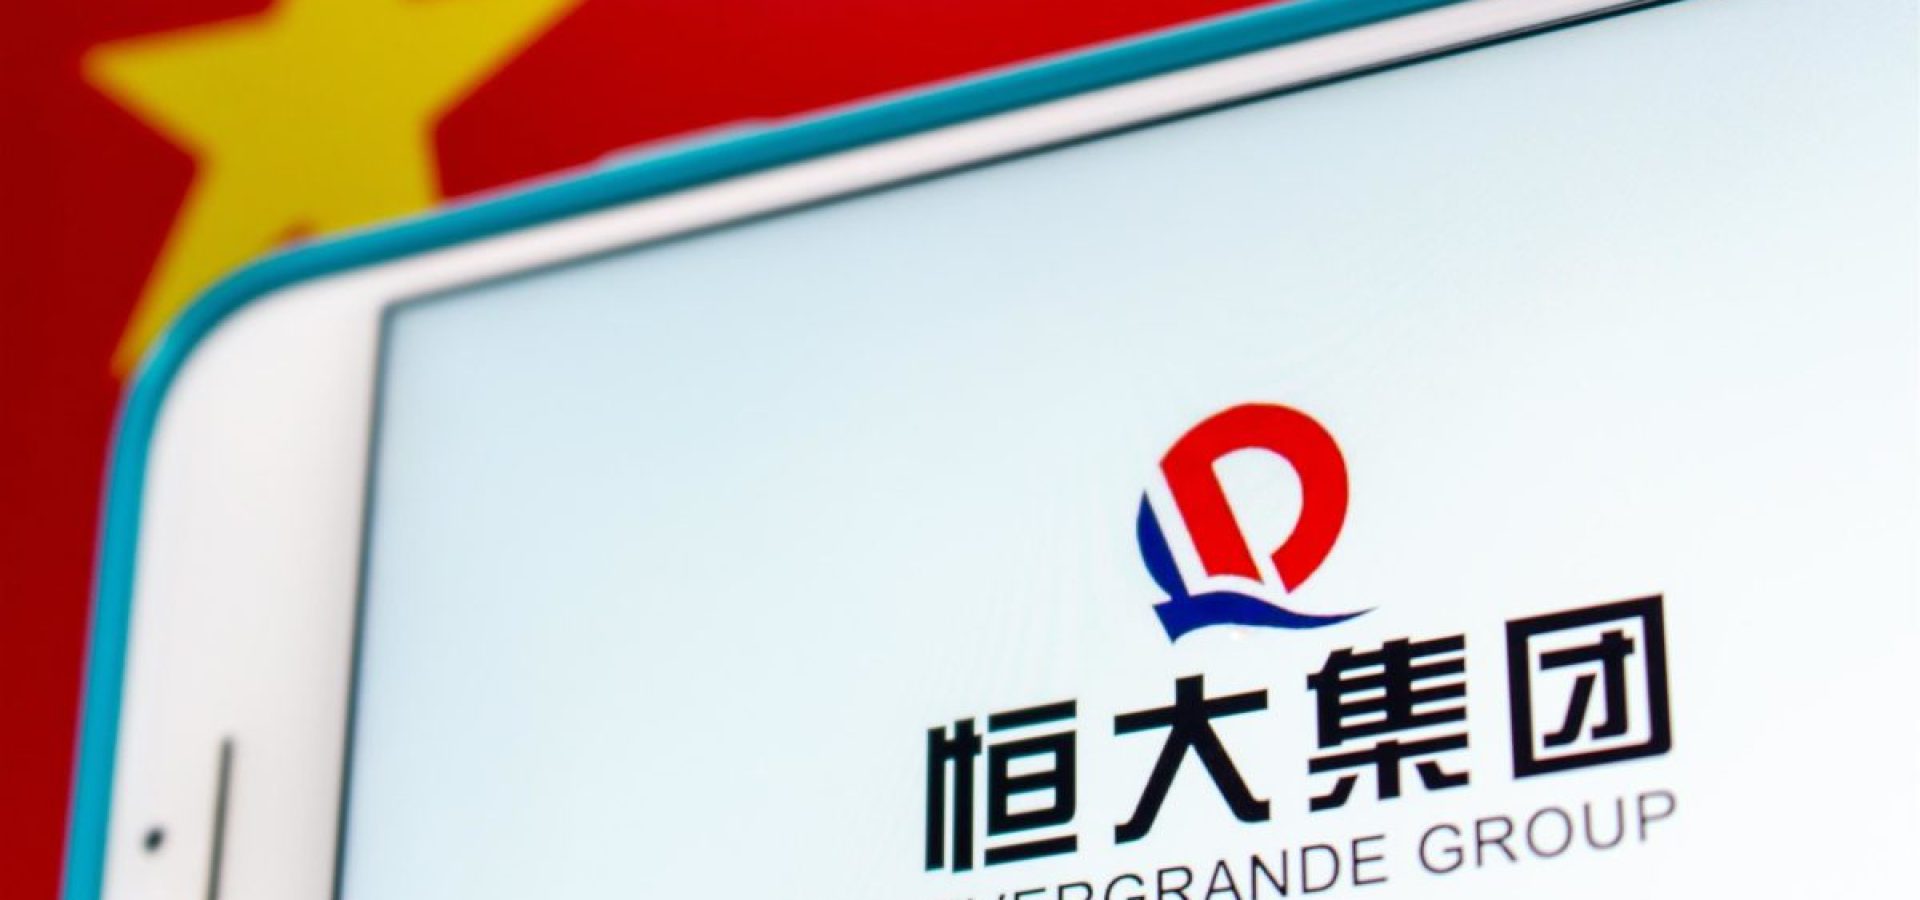 Evergrande's debt crisis will affect China's growth